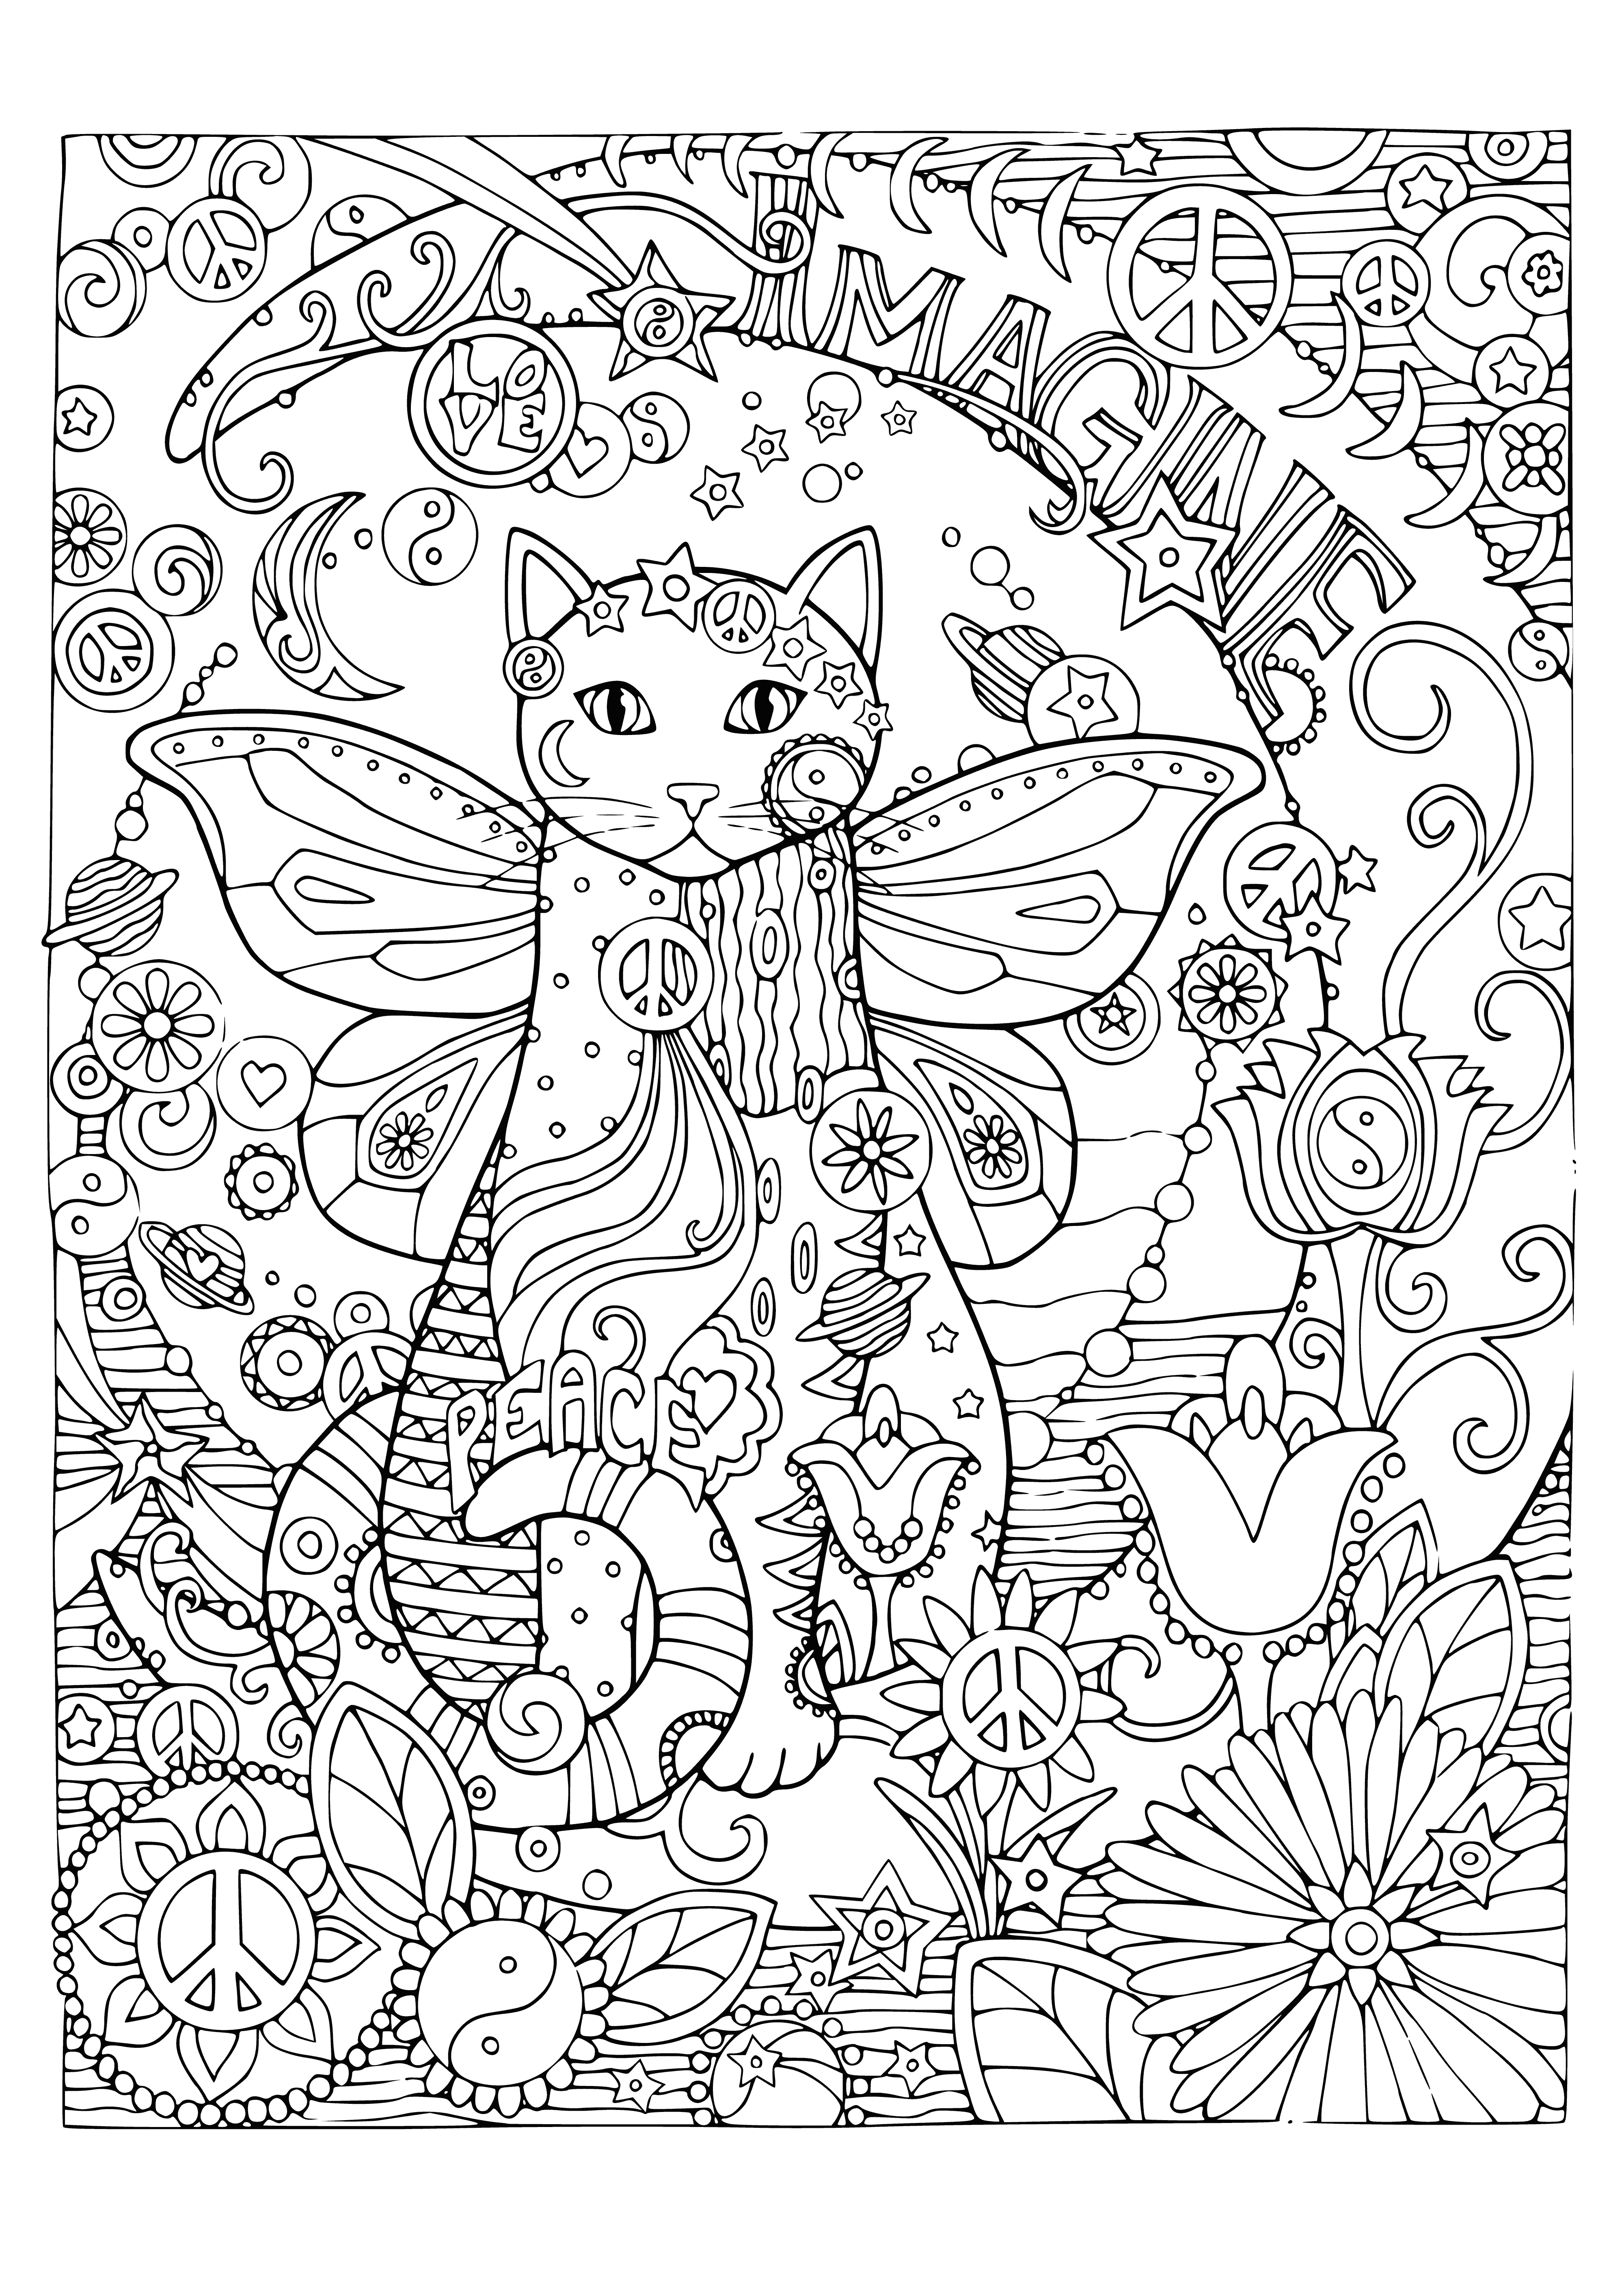 Imagination coloring page